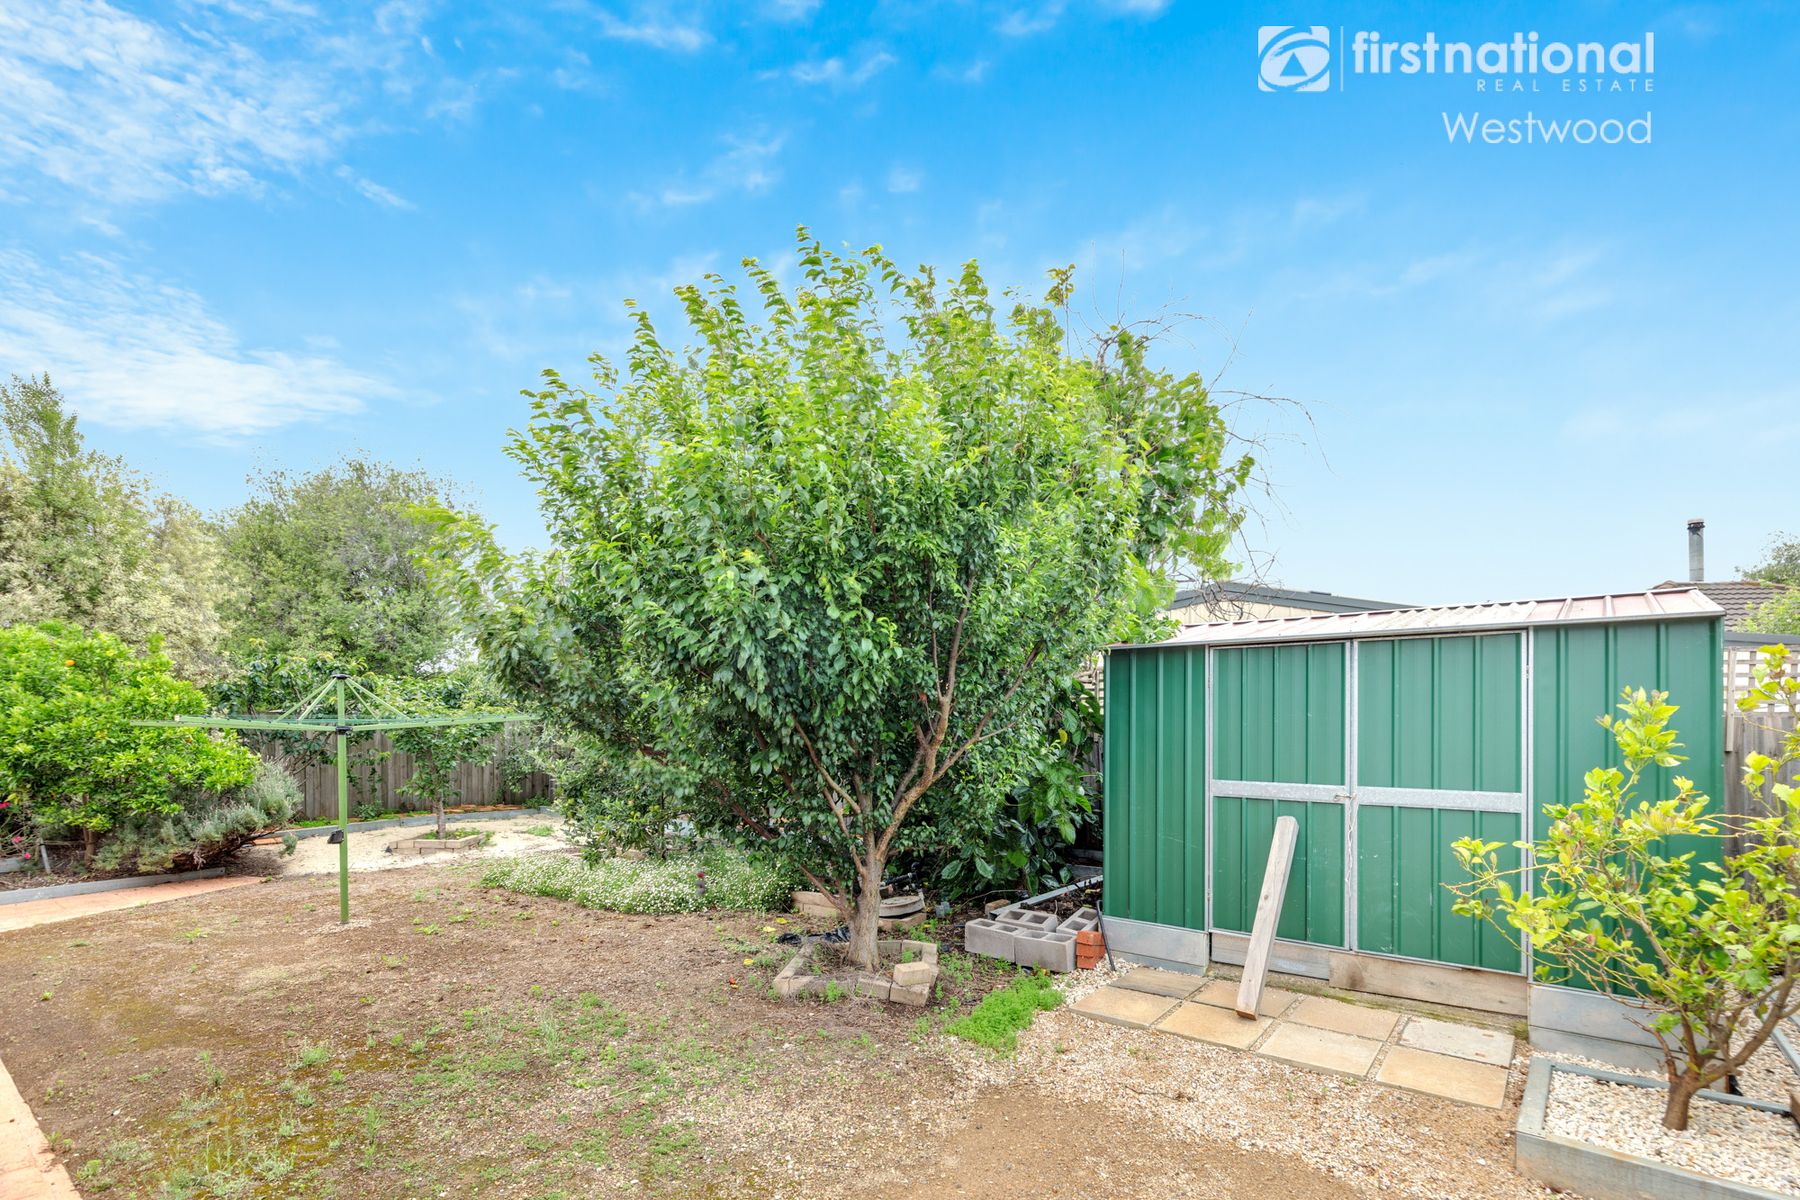 9 Penny Crescent, Hoppers Crossing, VIC 3029